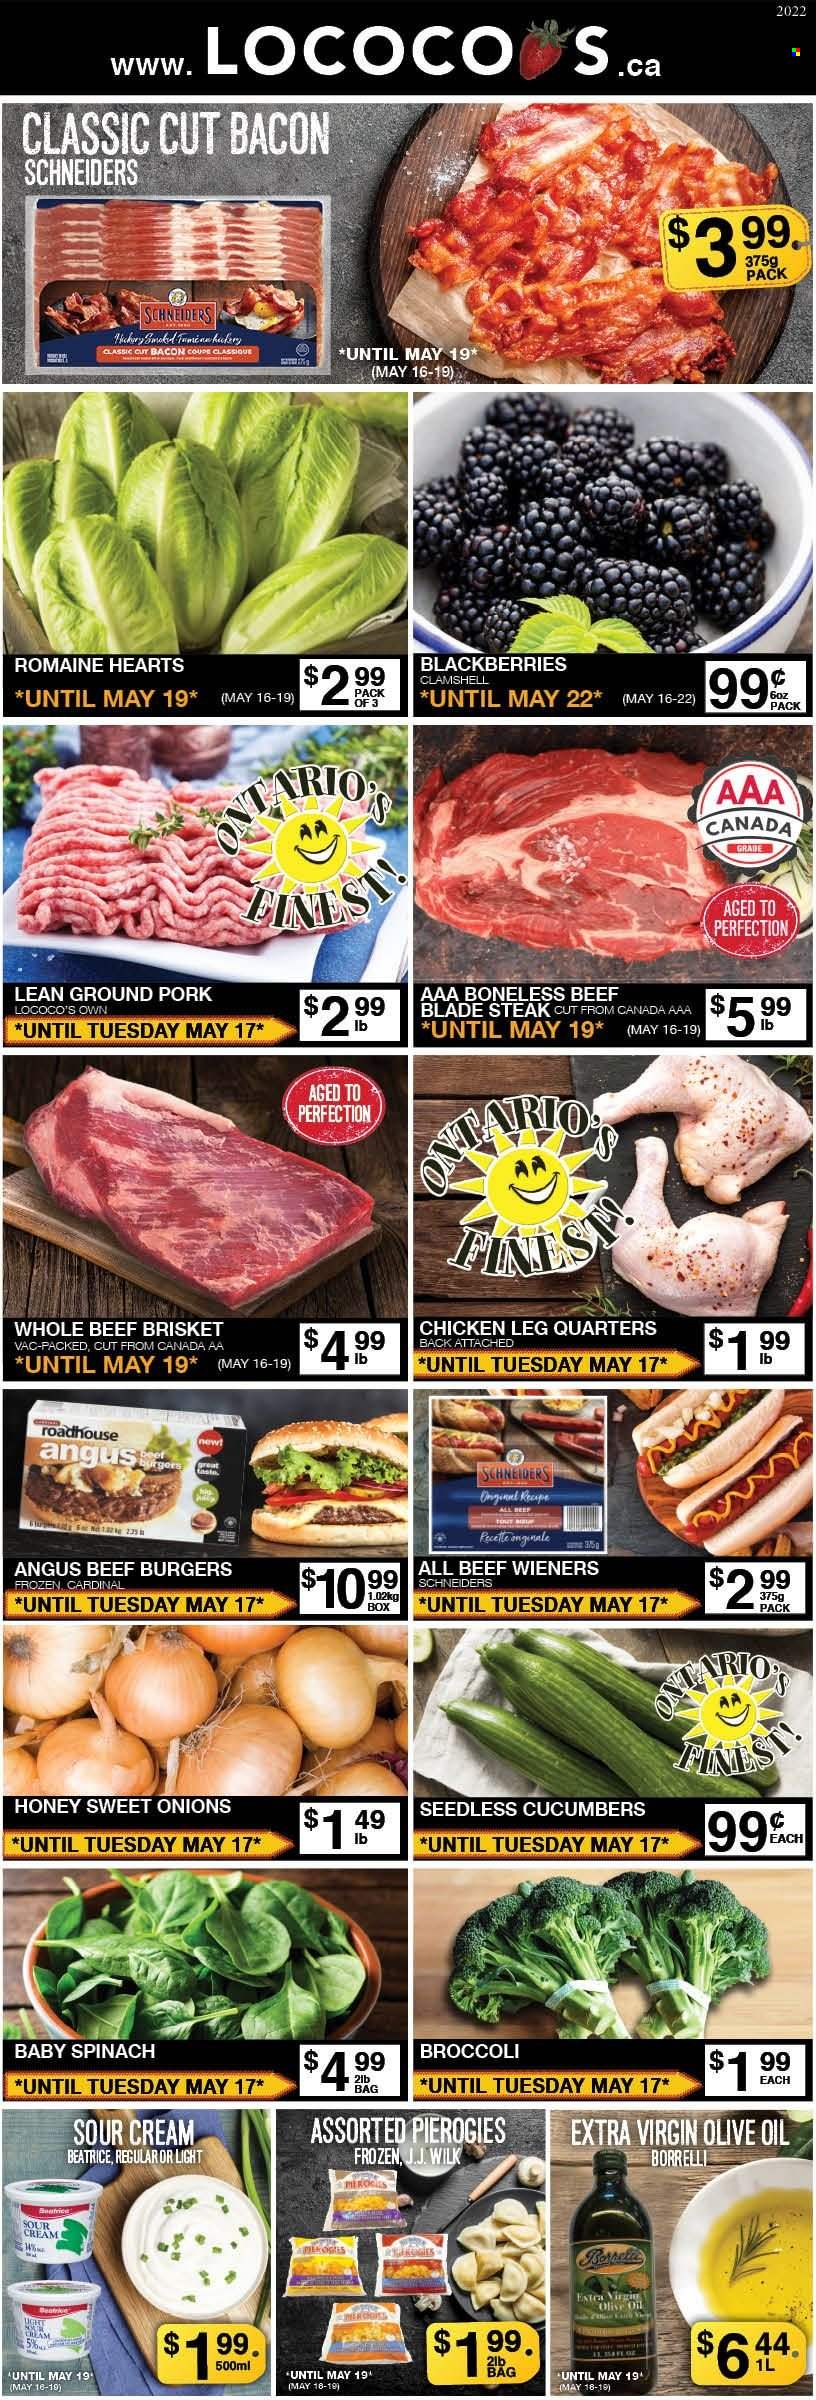 thumbnail - Lococo's Flyer - May 16, 2022 - May 19, 2022 - Sales products - broccoli, cucumber, spinach, blackberries, chicken legs, beef meat, beef brisket, ground pork, hamburger, beef burger, bacon, honey, steak. Page 1.